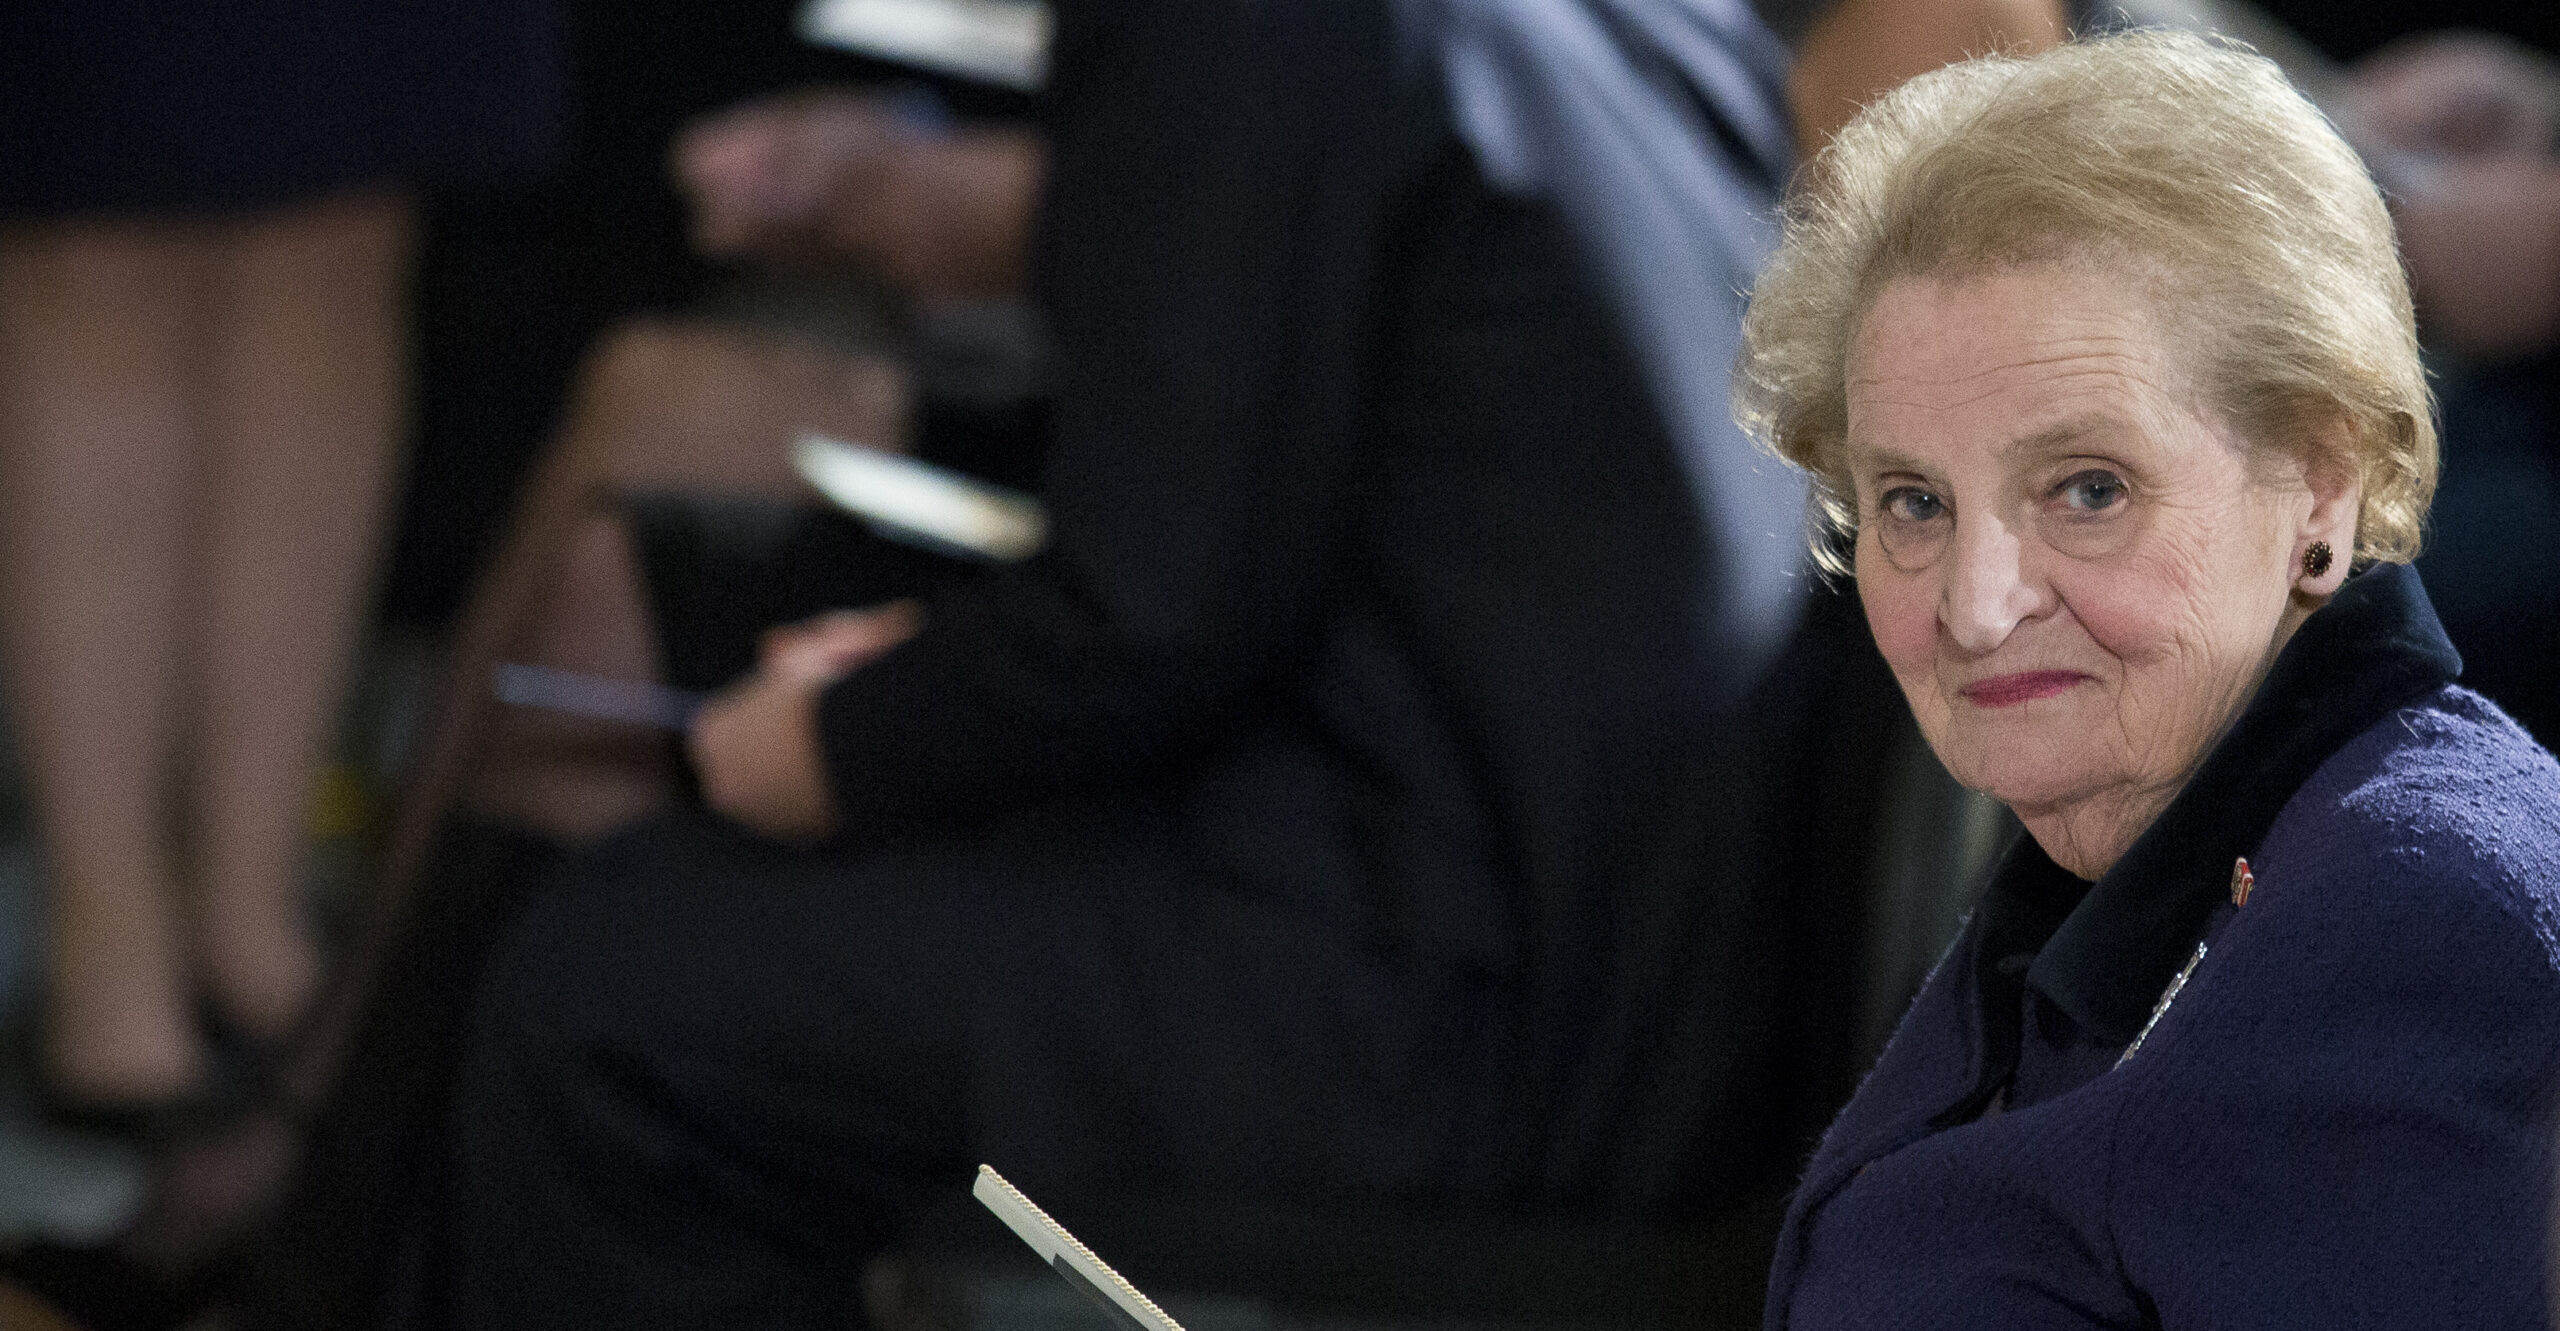 Madeleine Albright Described ‘Small and Pale’ Putin as ‘Almost Reptilian’ in Final Op-Ed